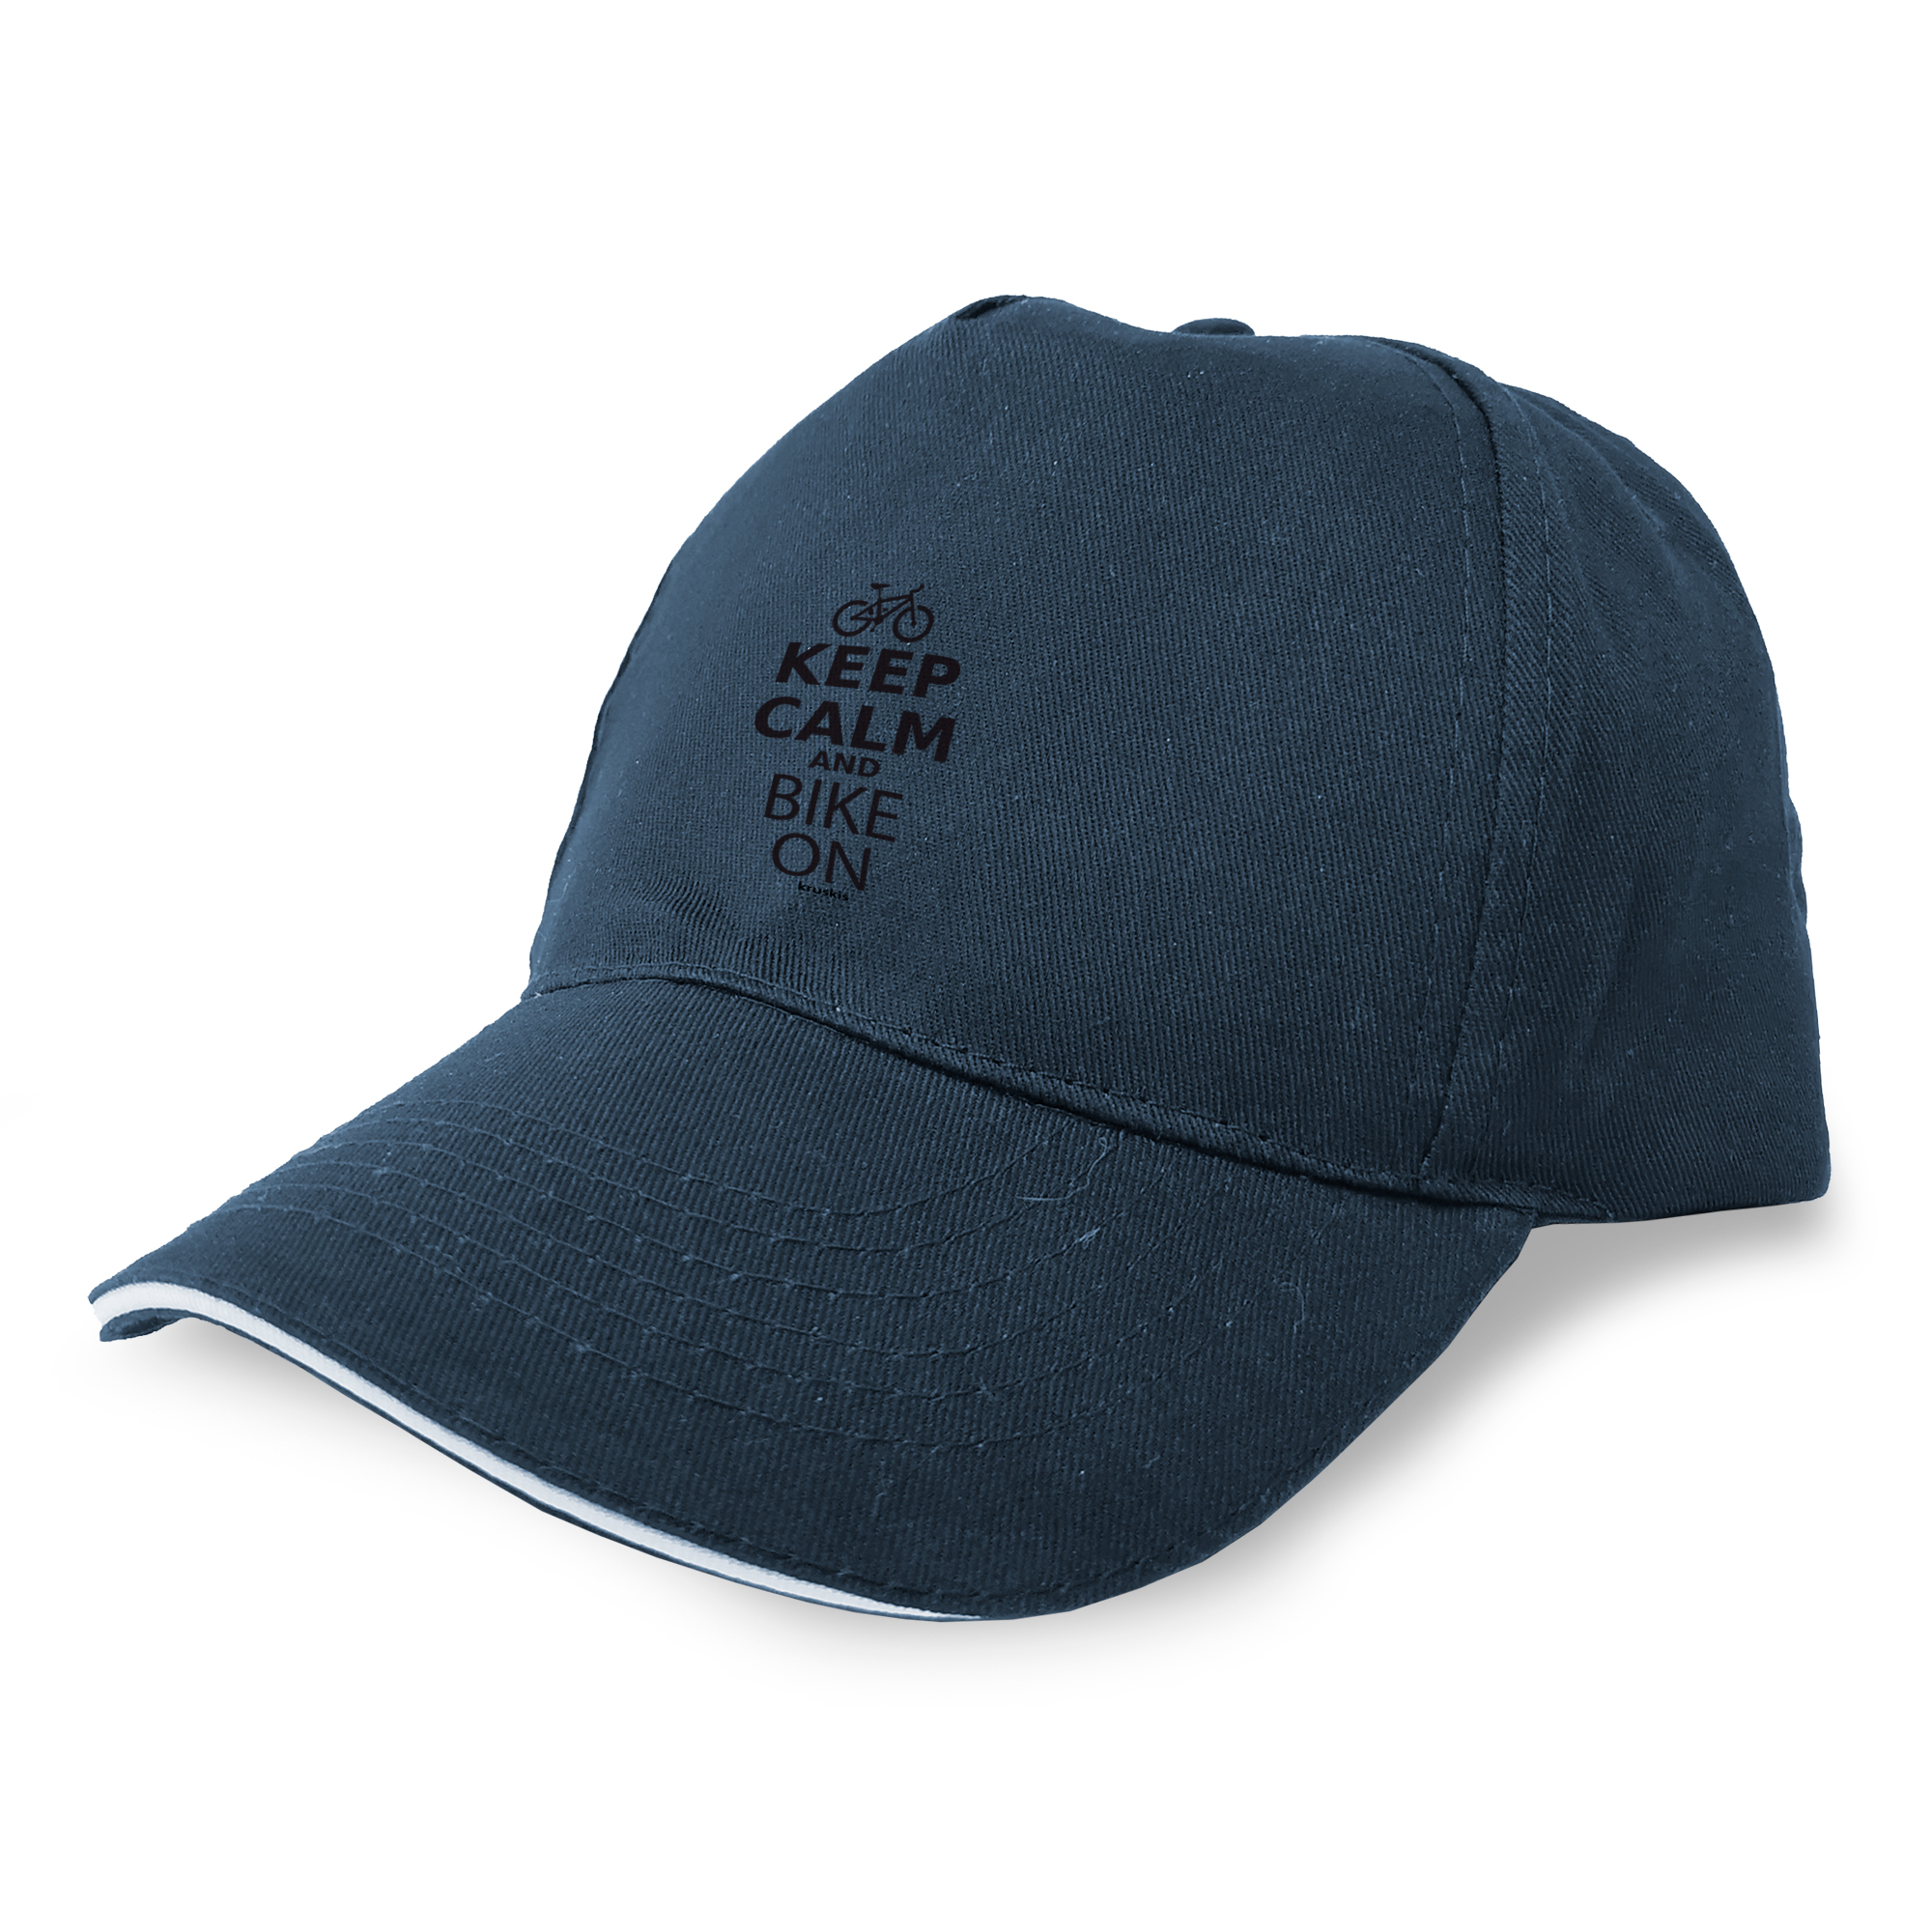 Casquette Velo Keep Calm and Bike On Unisex